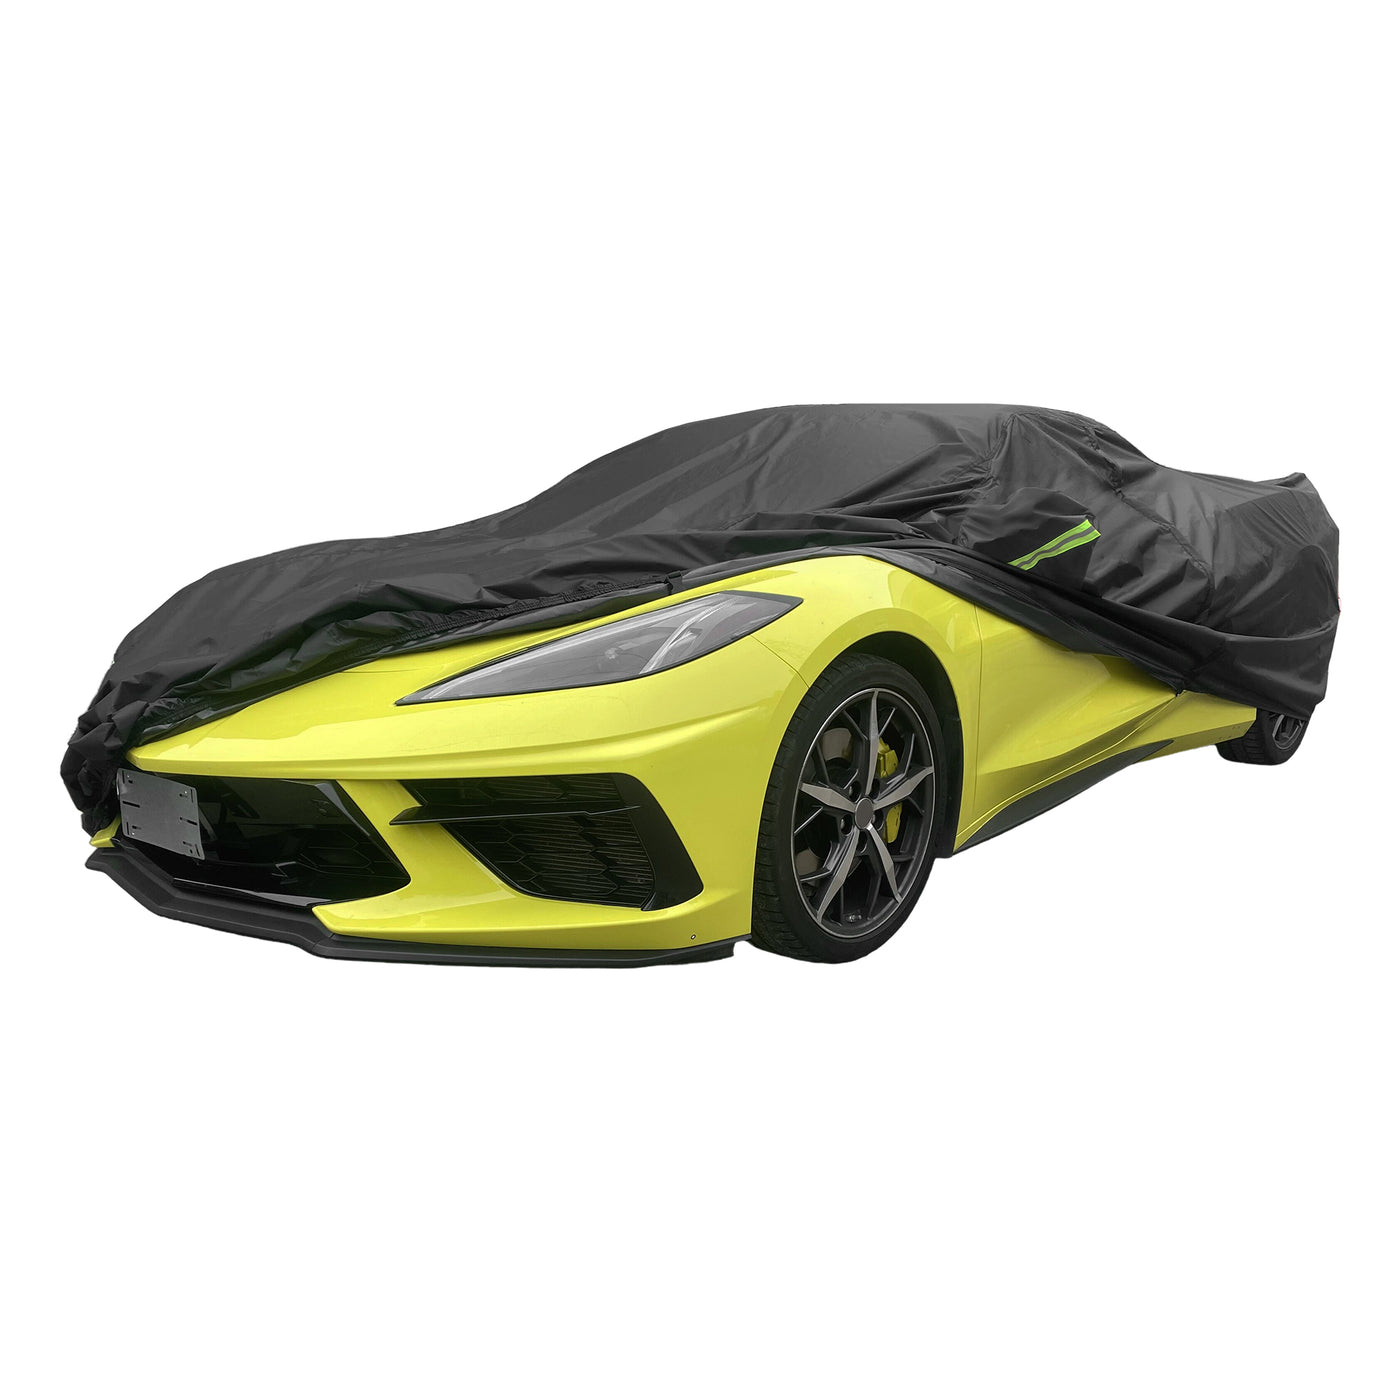 X AUTOHAUX Waterproof Car Cover for Chevrolet Corvette C4 C5 C6 C7 1984-2019 210D Outdoor Full Car Cover All Weather Windproof Sun Rain Protection with Door Zipper